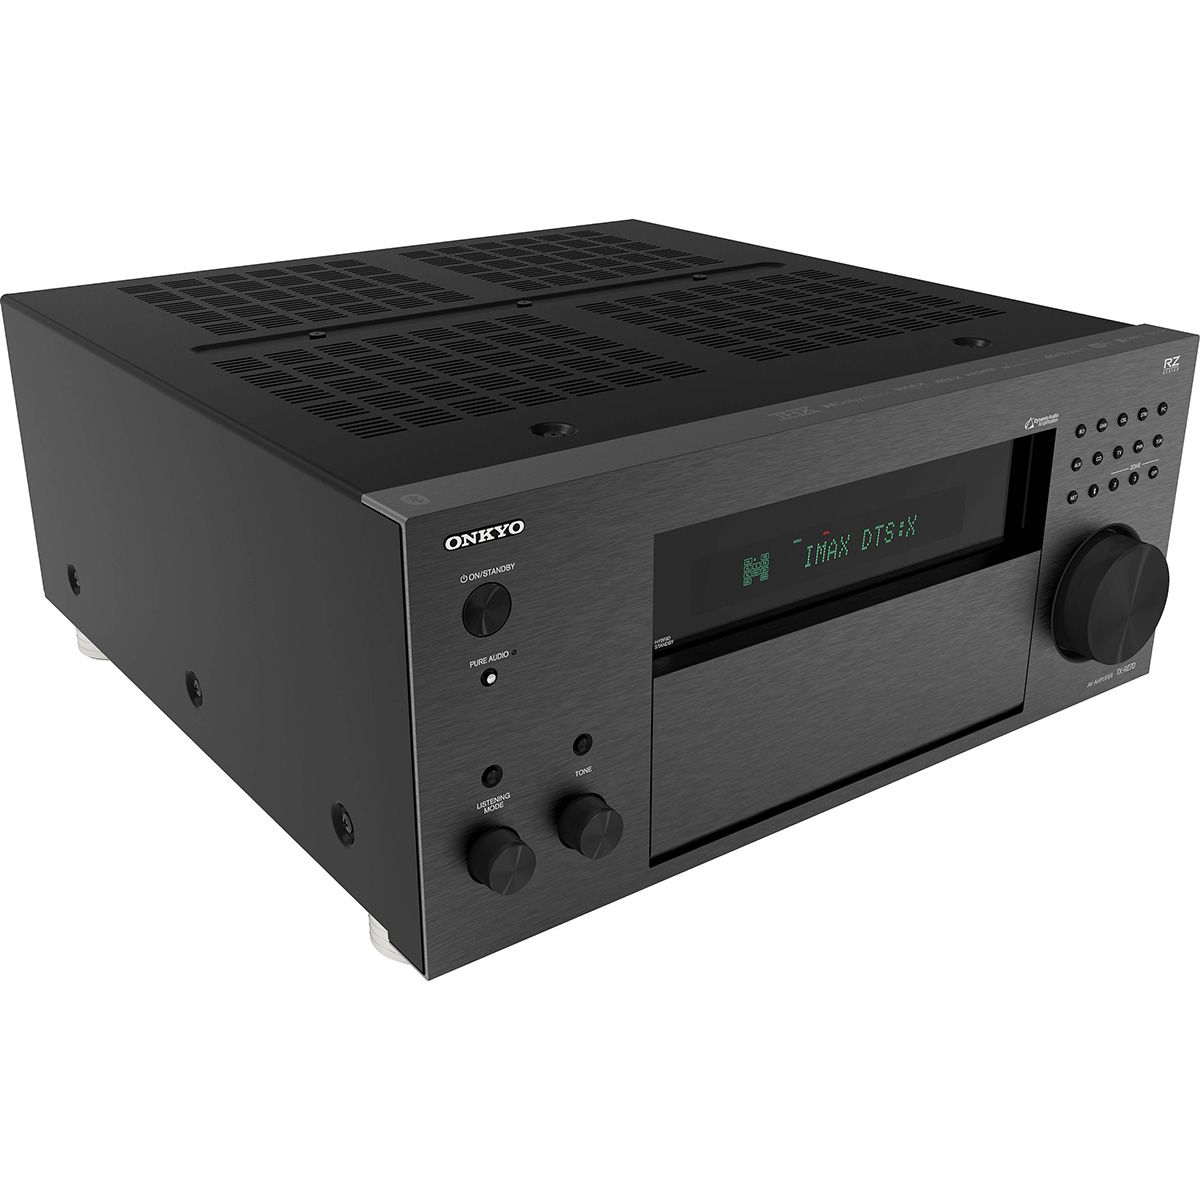 Onkyo TX-RZ70 Home Theater Receiver, front side left angle view